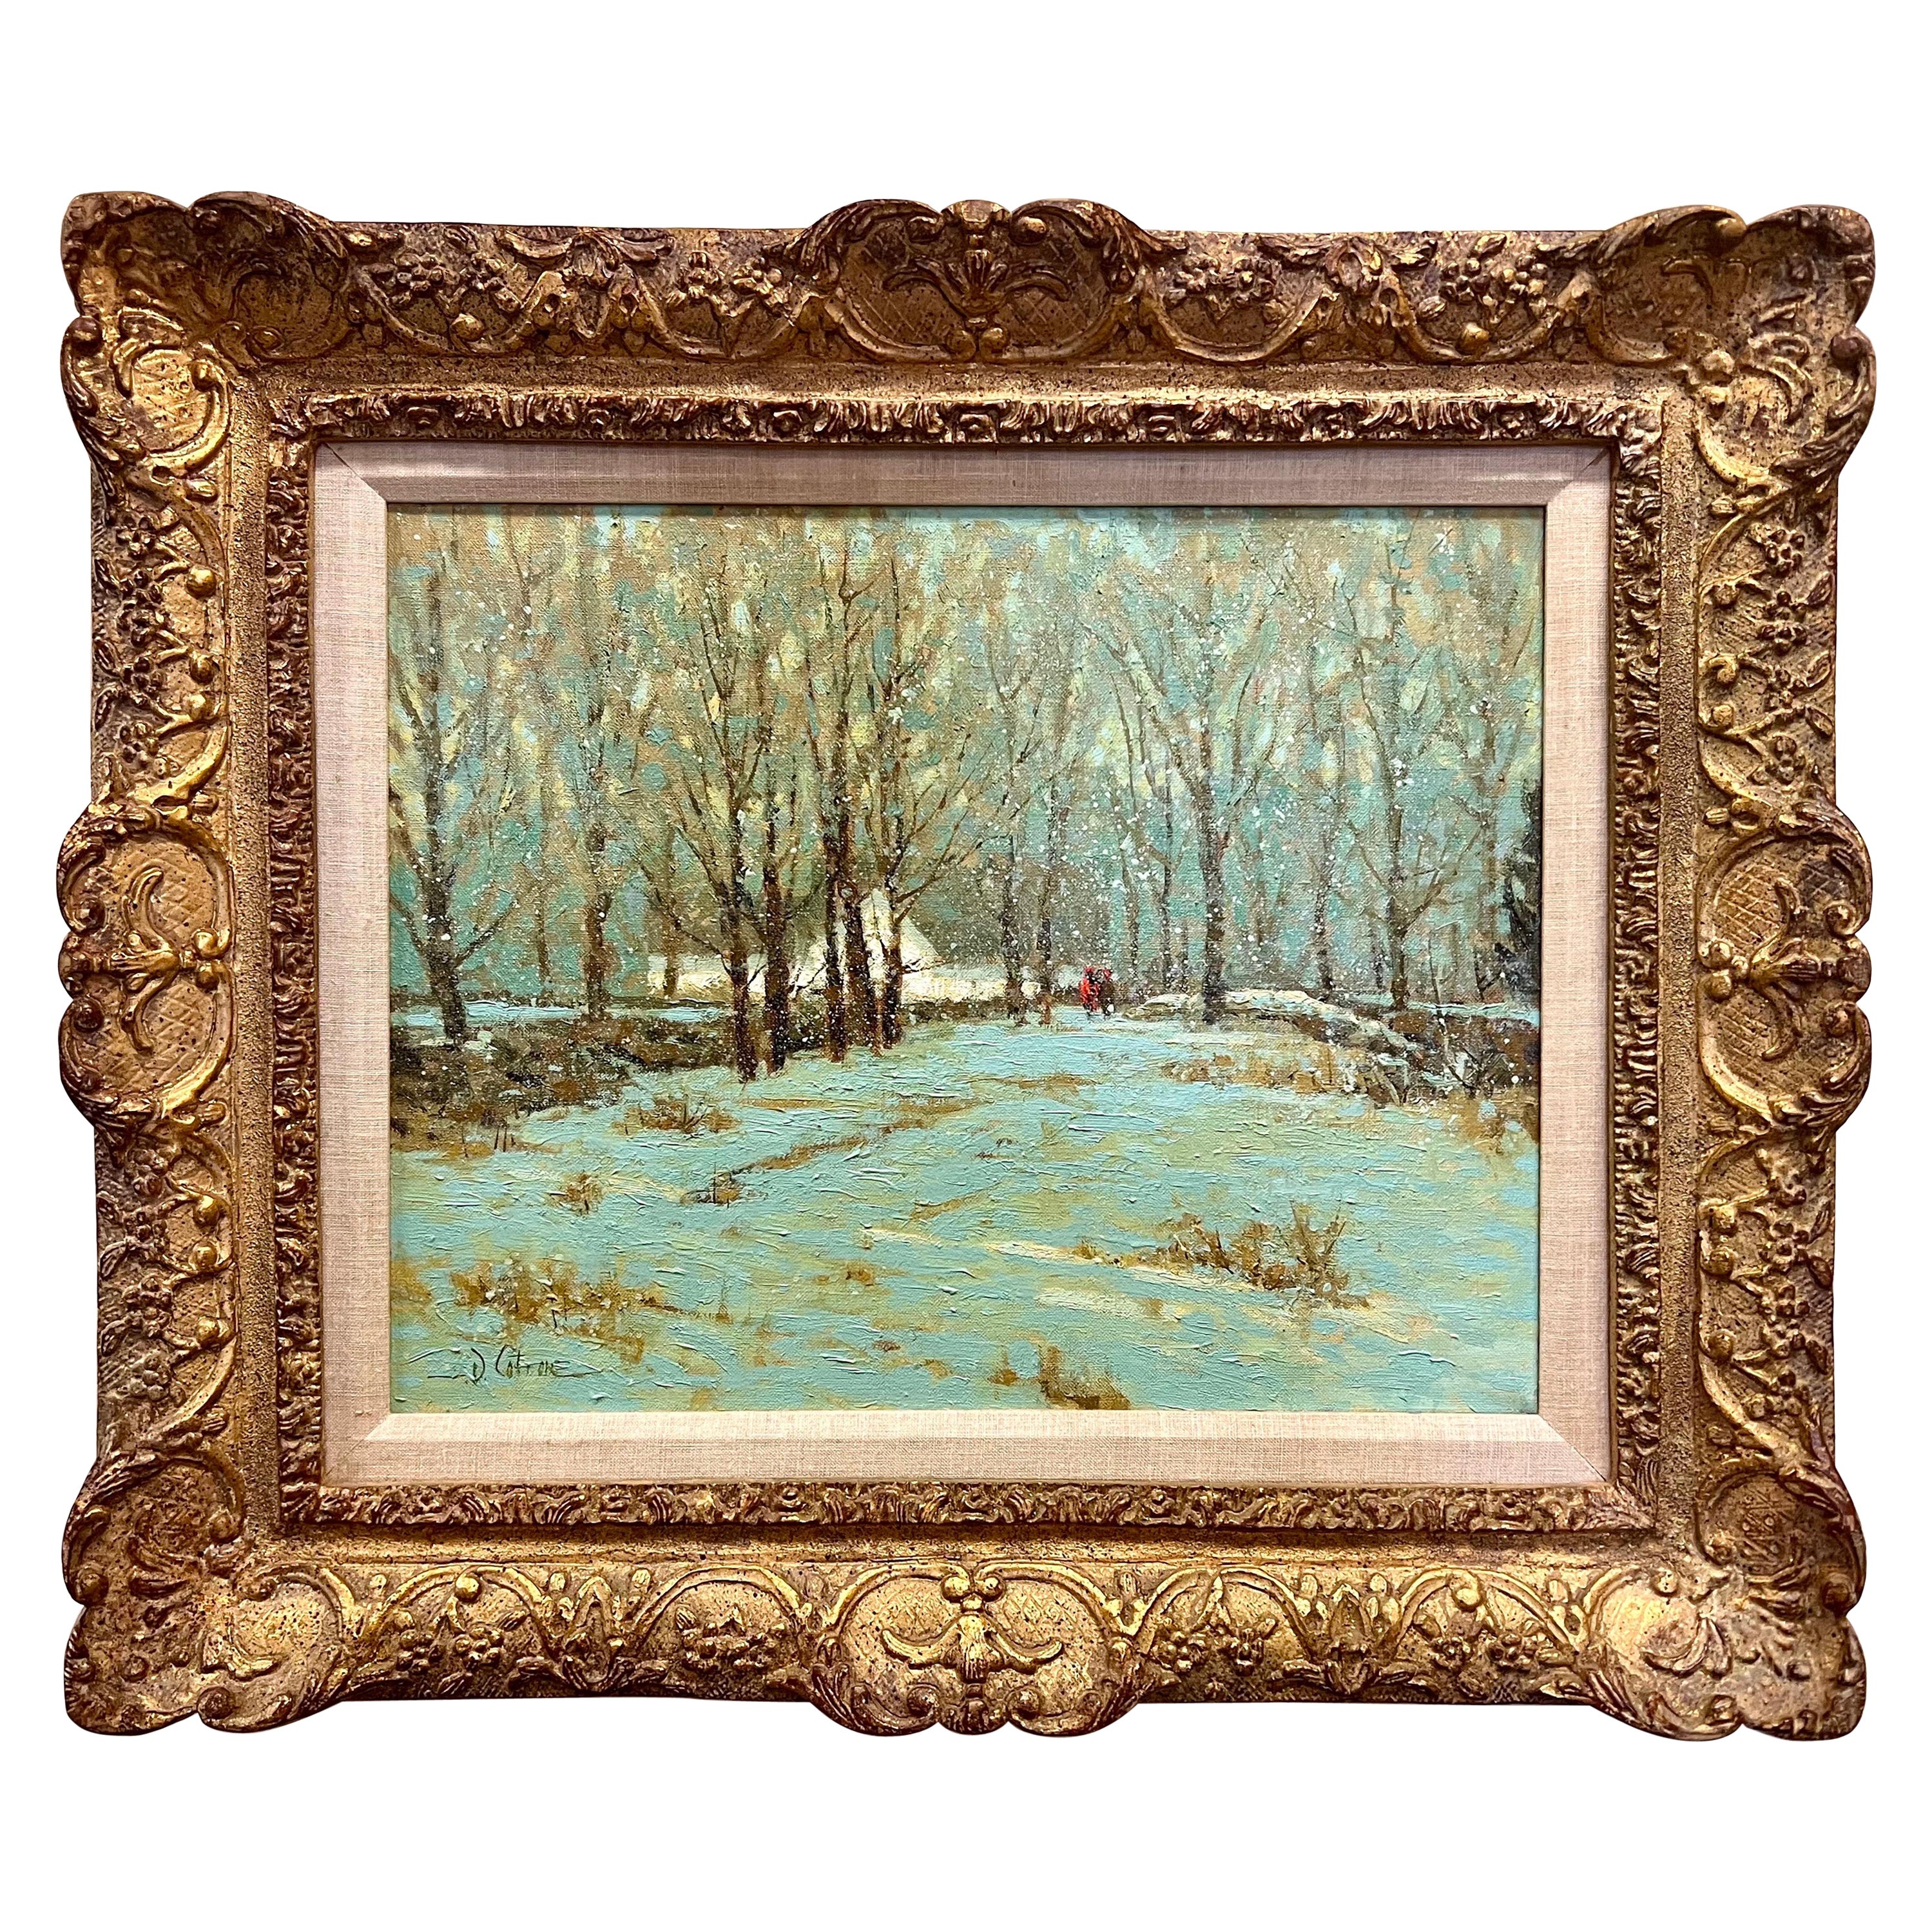 Original Signed Oil Painting of a Snow Scene By Listed Artist Deborah Cotrone